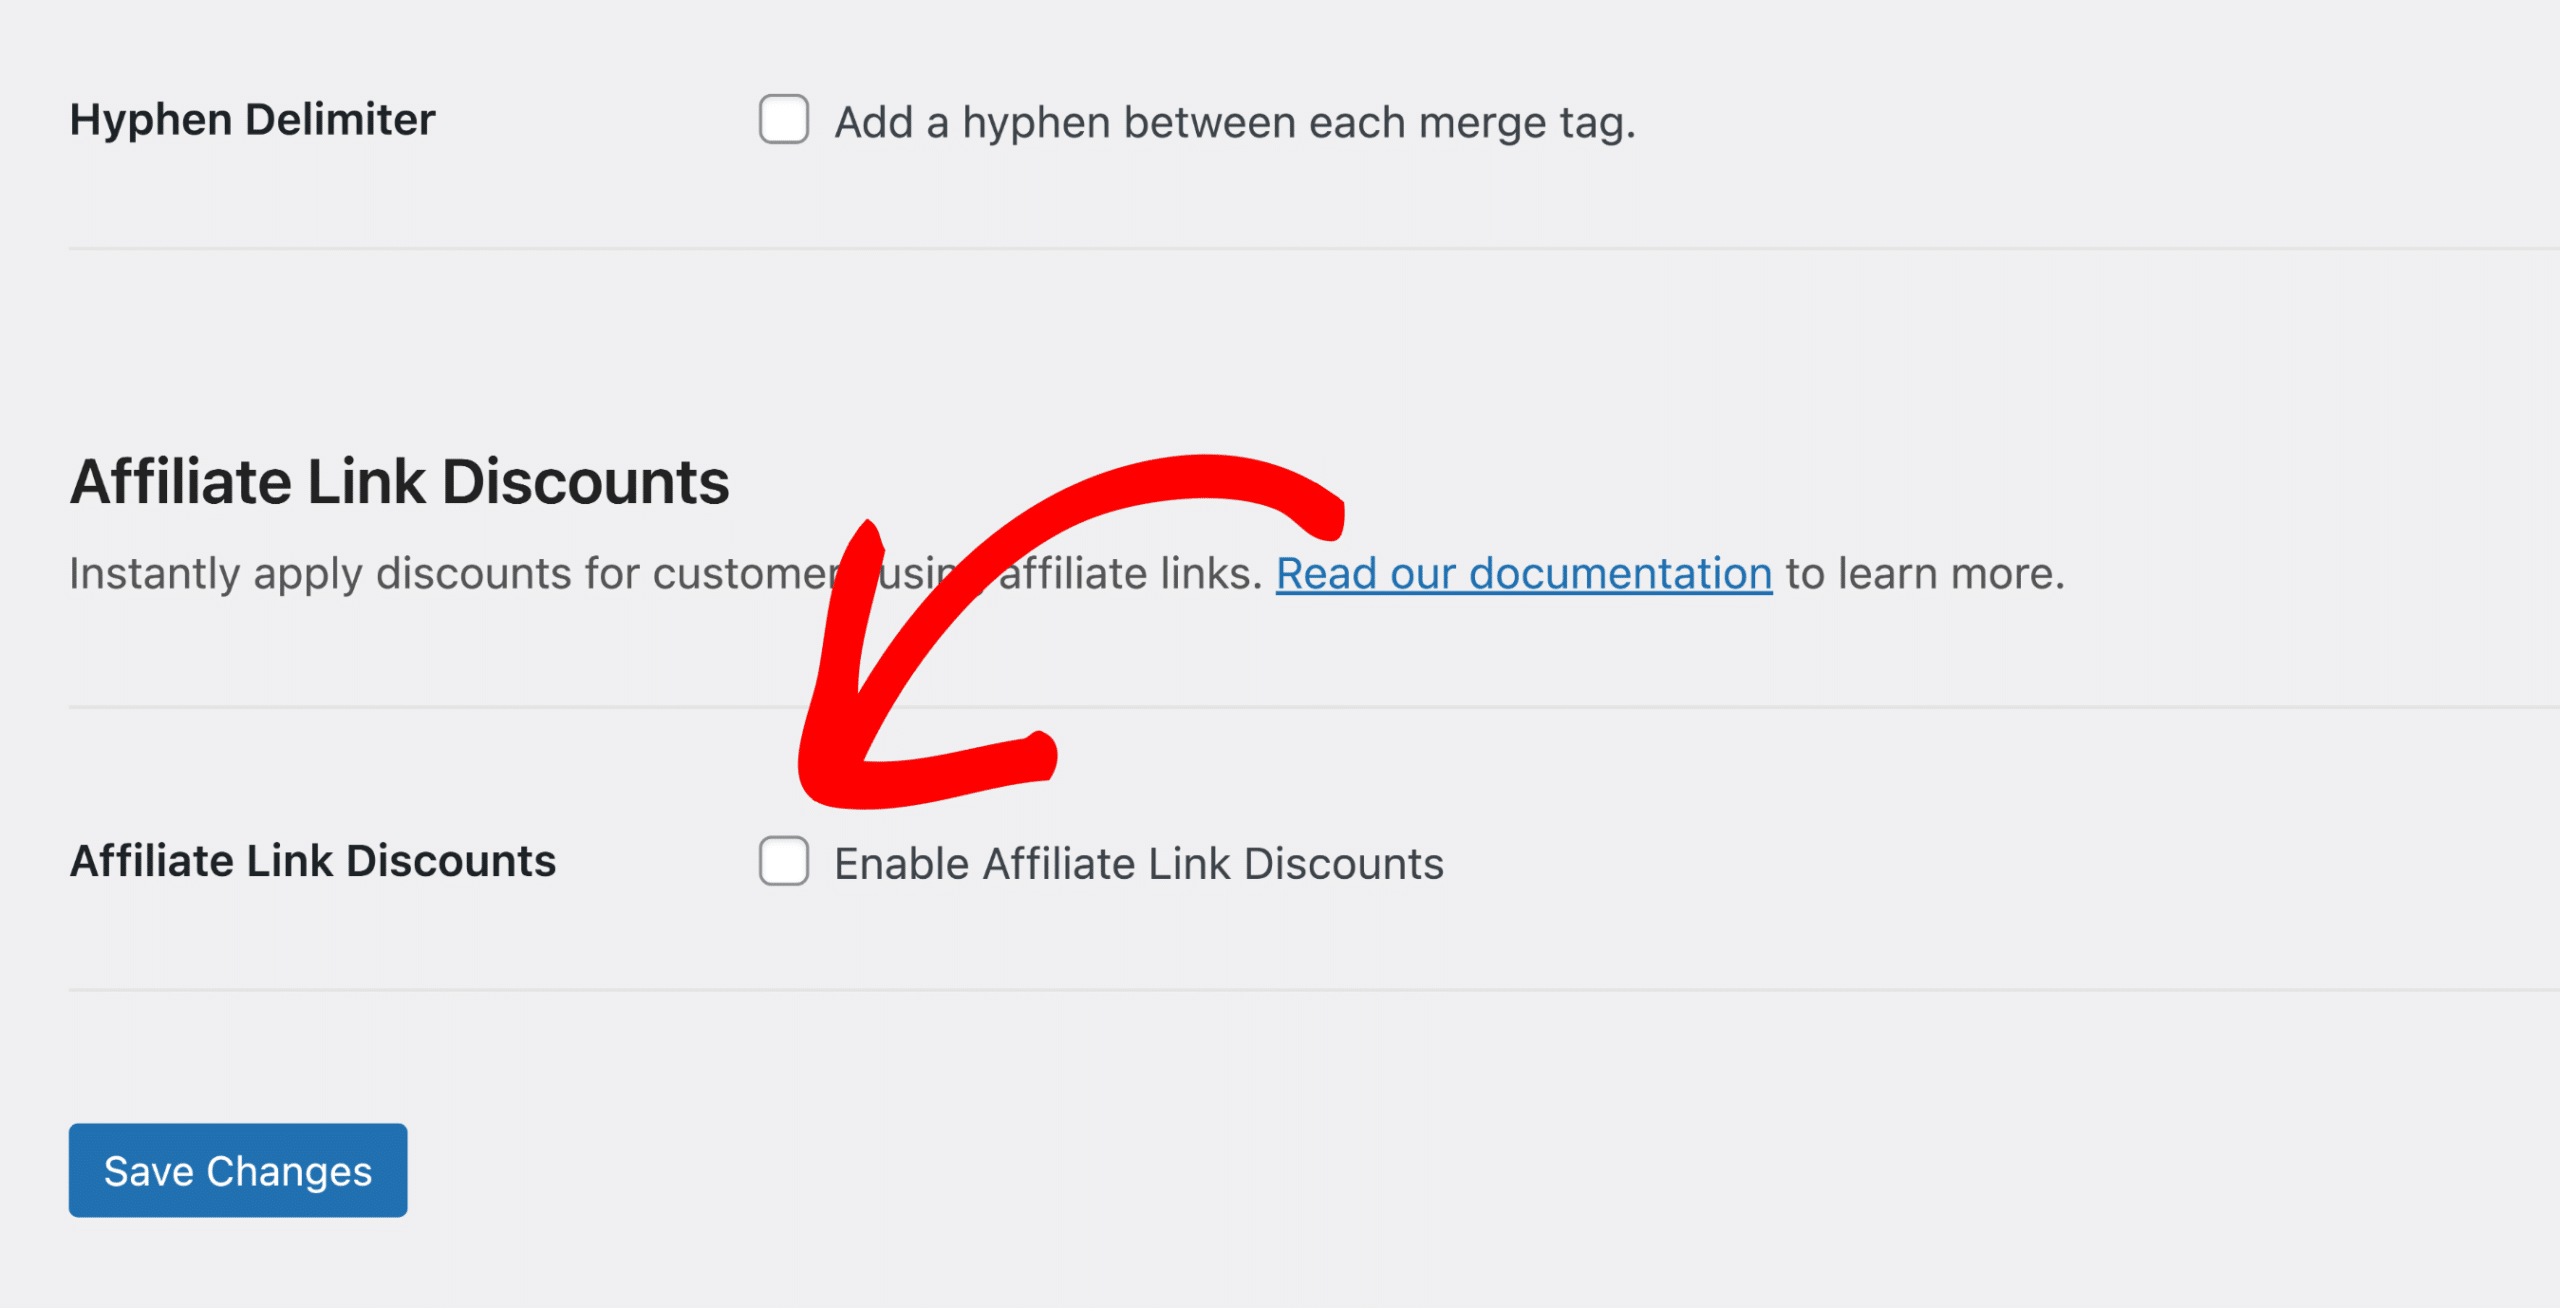 The option to enable Affiliate Link Discounts